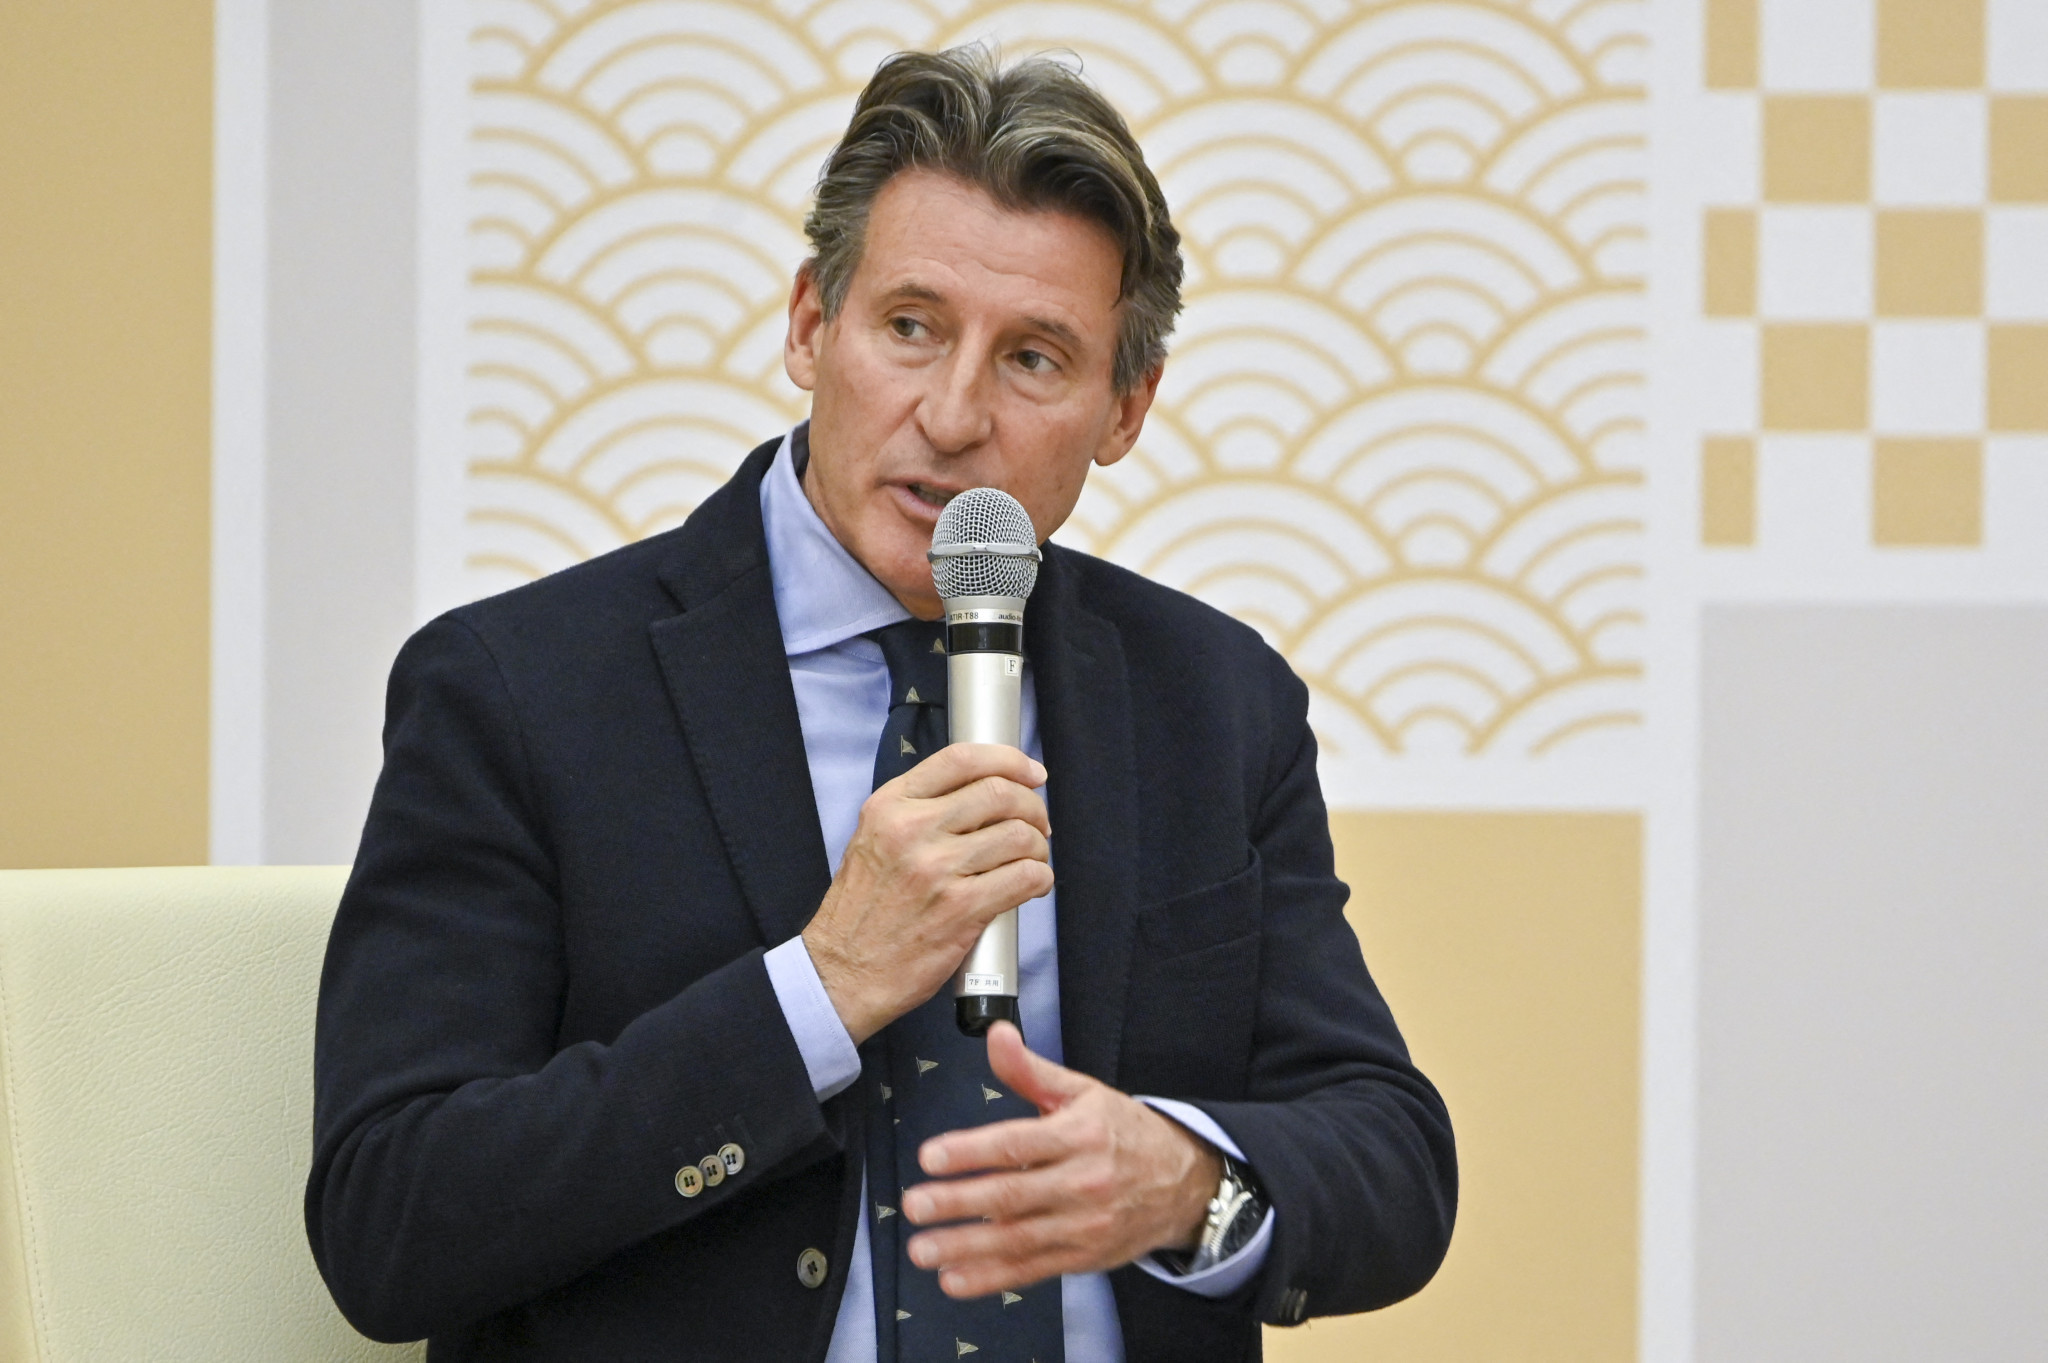 World Athletics President Sebastian Coe is among the few International Federation Presidents who are active on social media ©Getty Images 